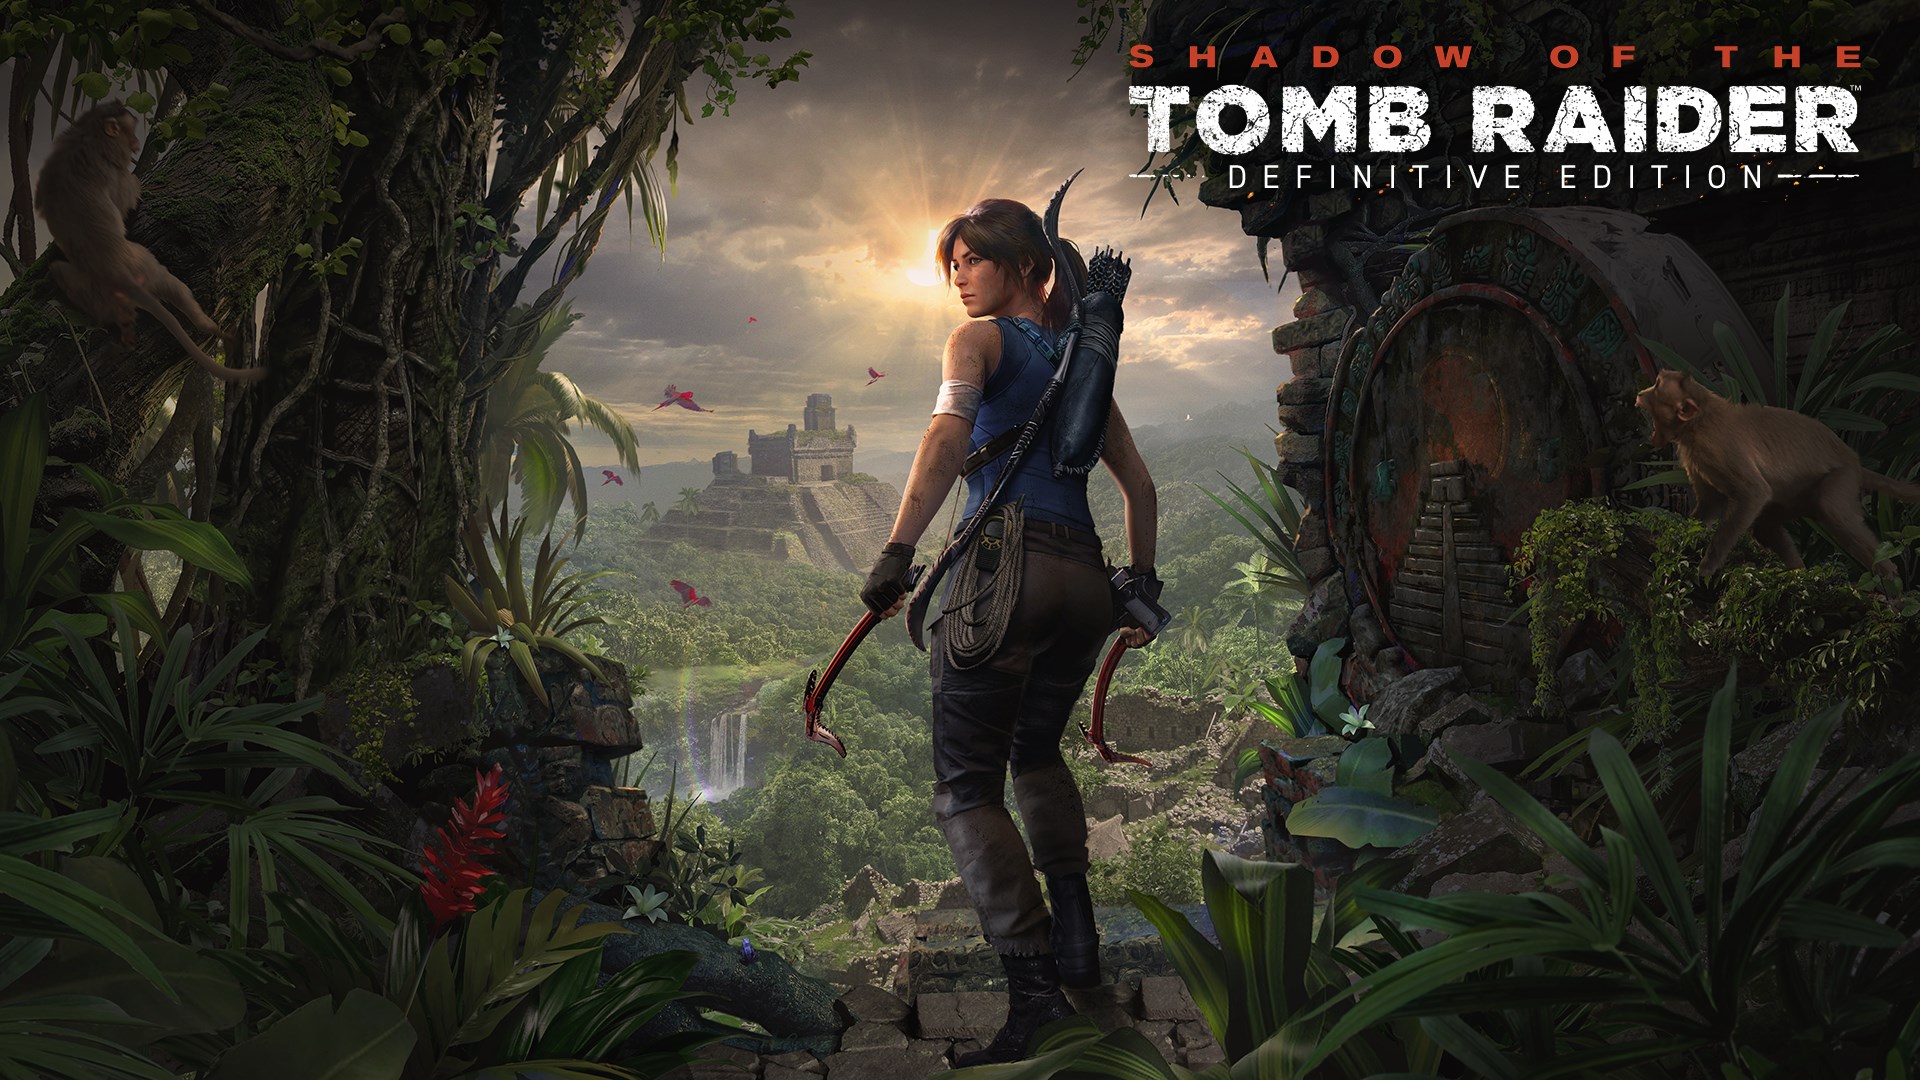 xbox game pass primeira quinzena abril - Shadow of the Tomb Raider Definitive Edition